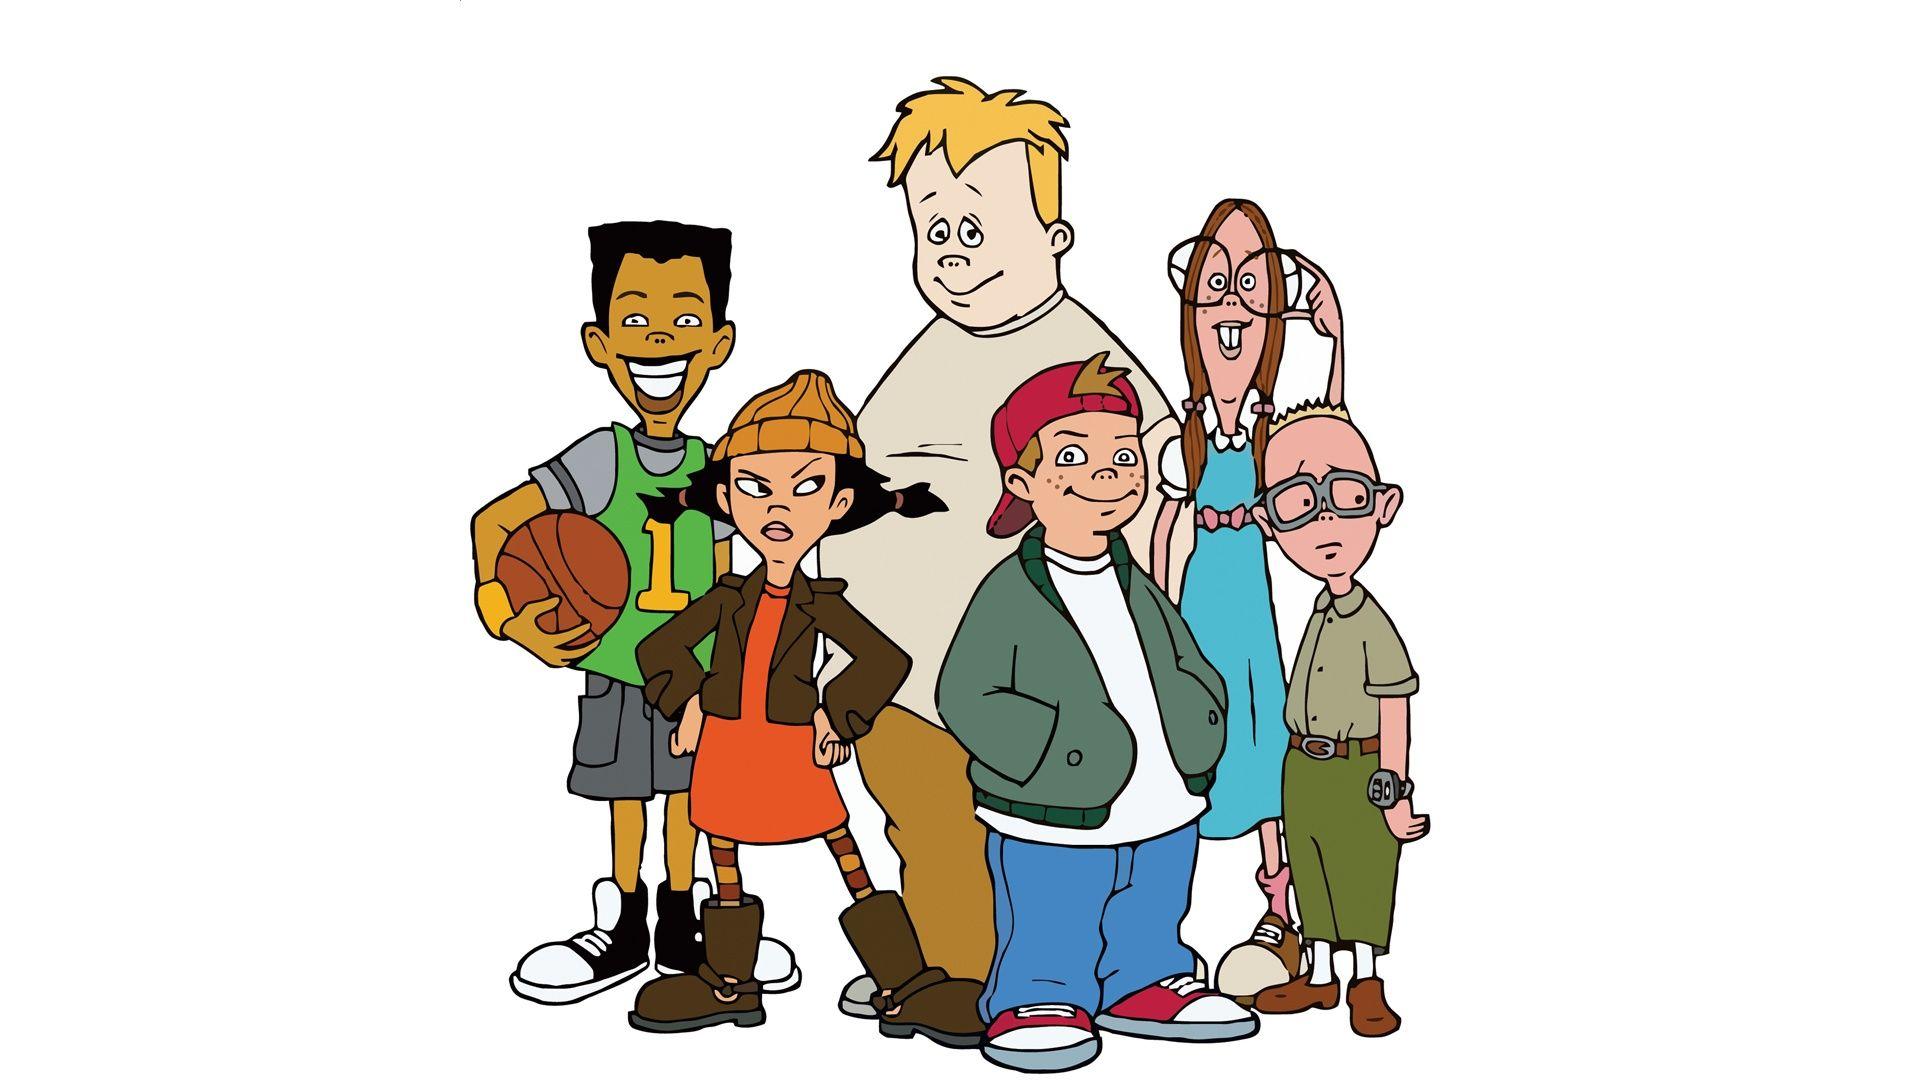 Disney's Recess Was the Best Social Philosophy Cartoon of All Time